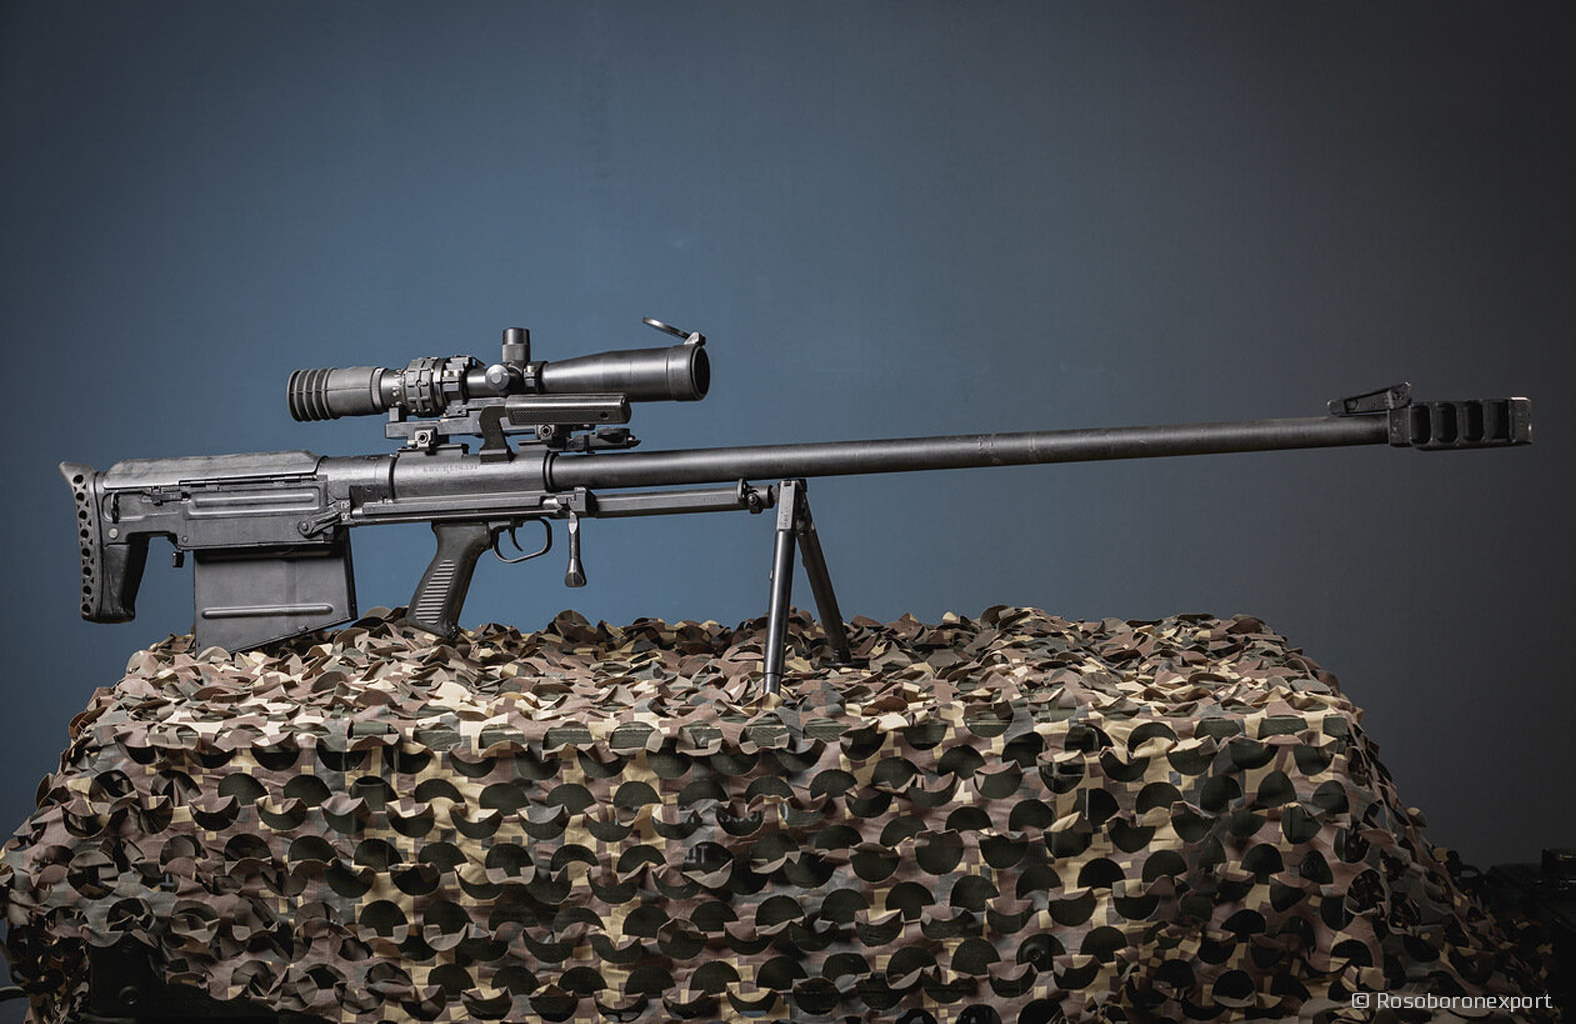 Gallery of Hunting Sniper Rifle.